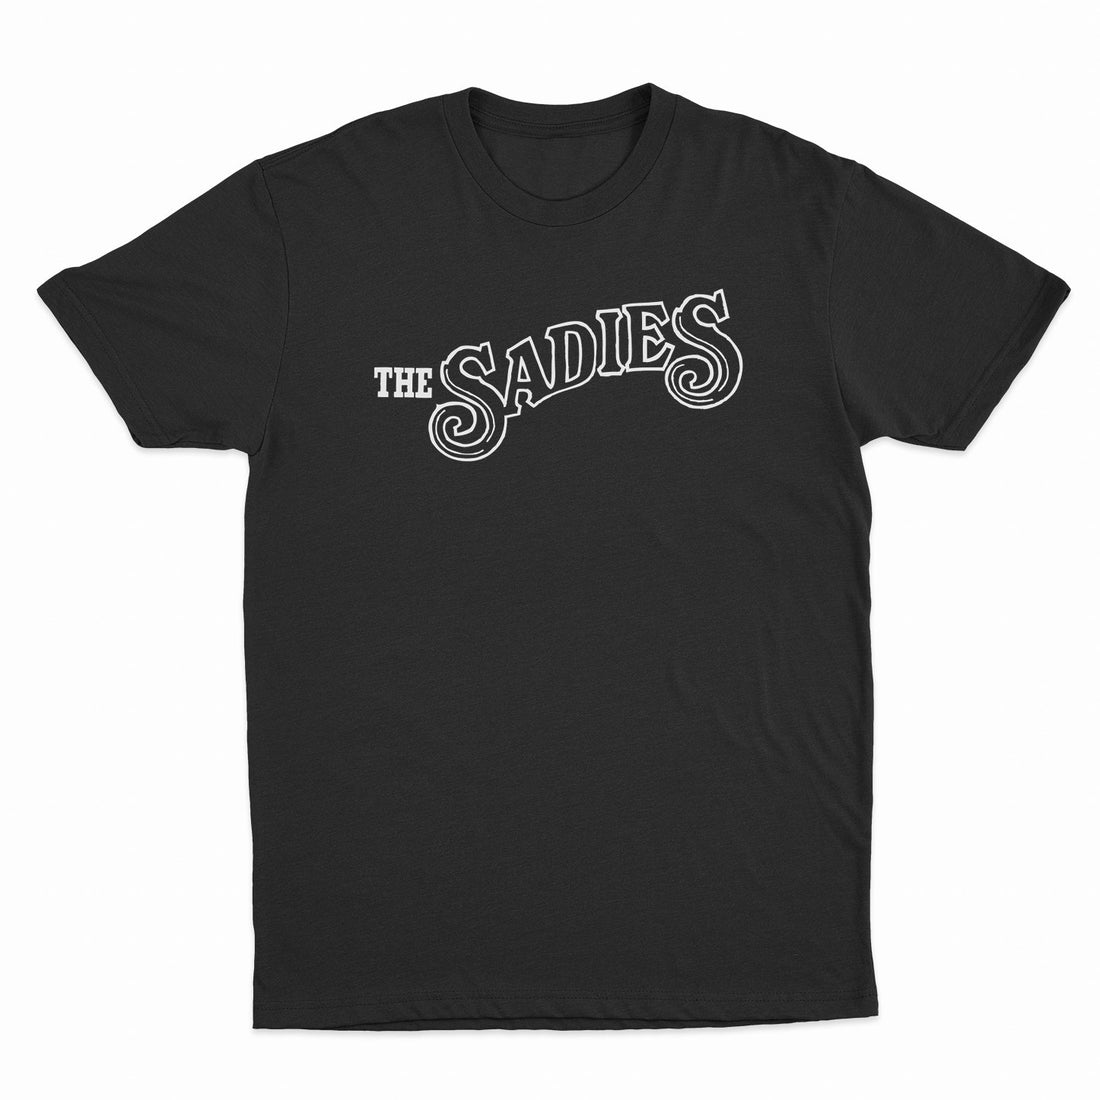 THE SADIES - Classic Logo Black Tee - Adult and Youth Sizing